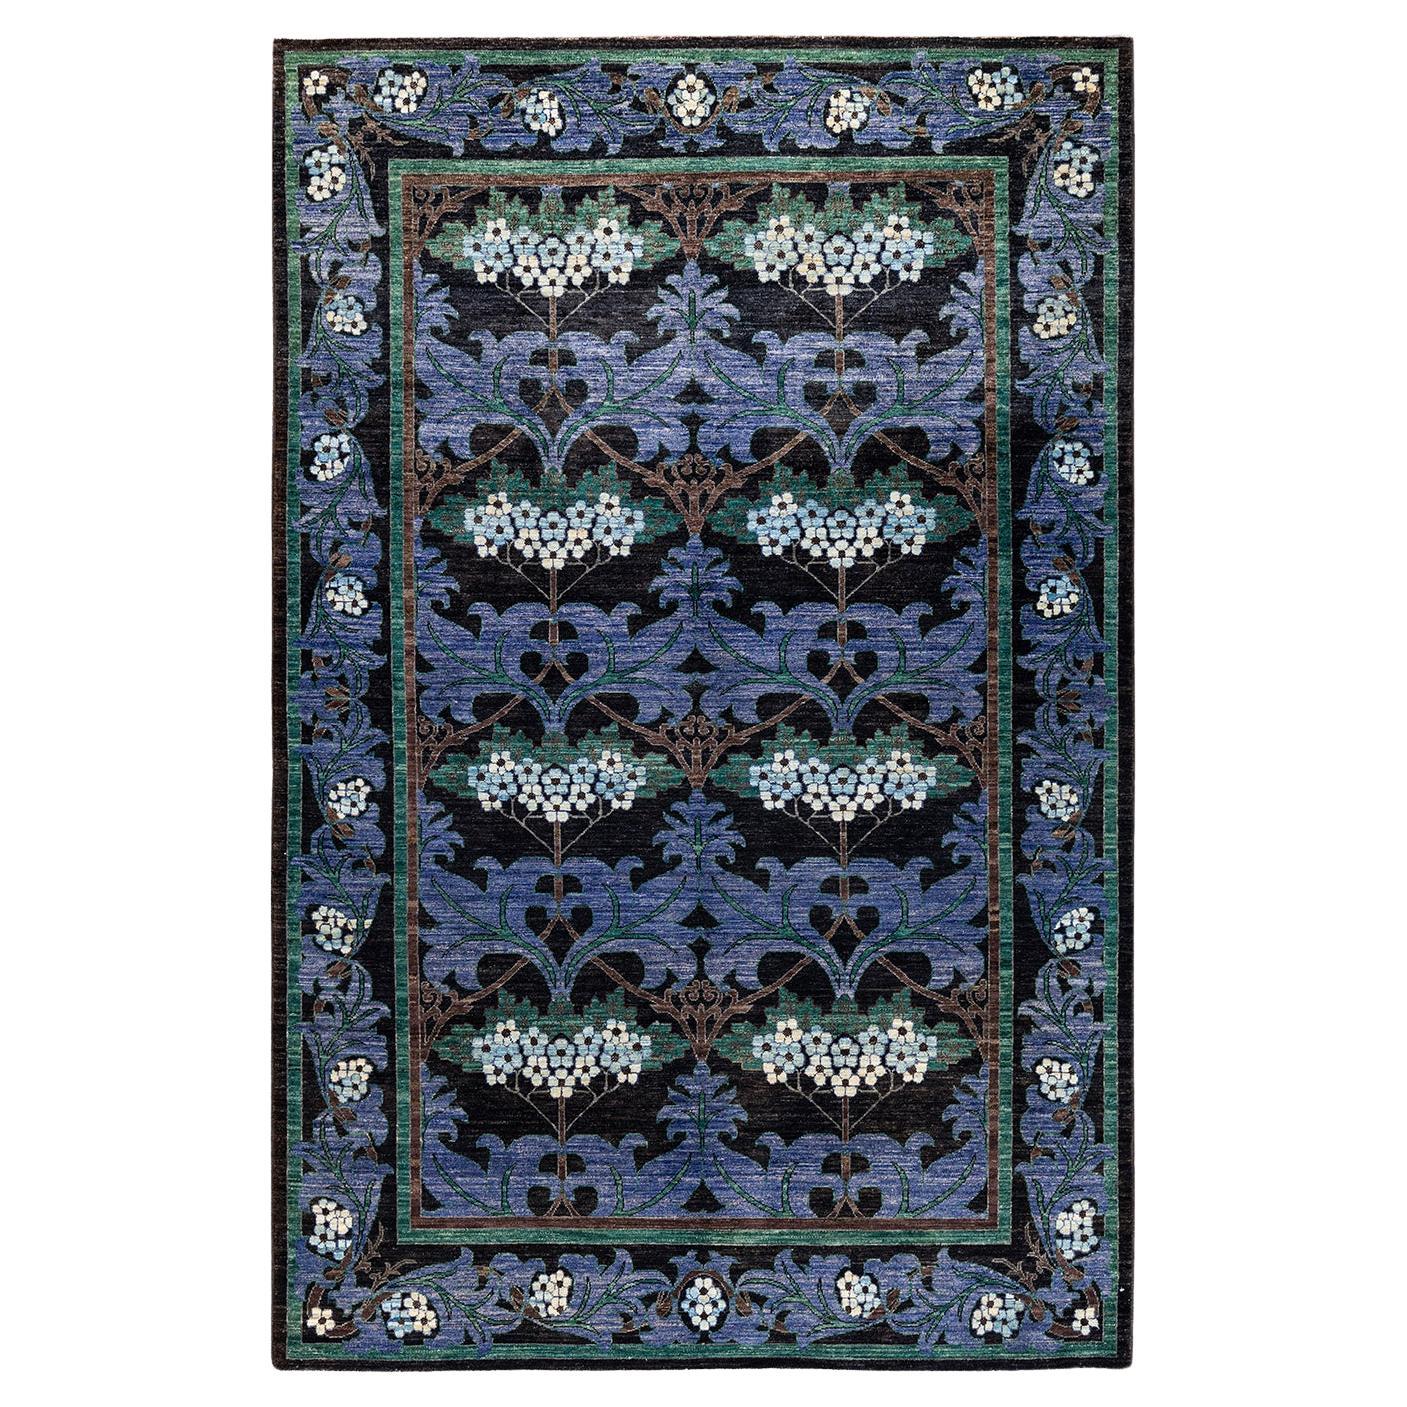 Contemporary Arts & Crafts Hand Knotted Wool Black Area Rug 